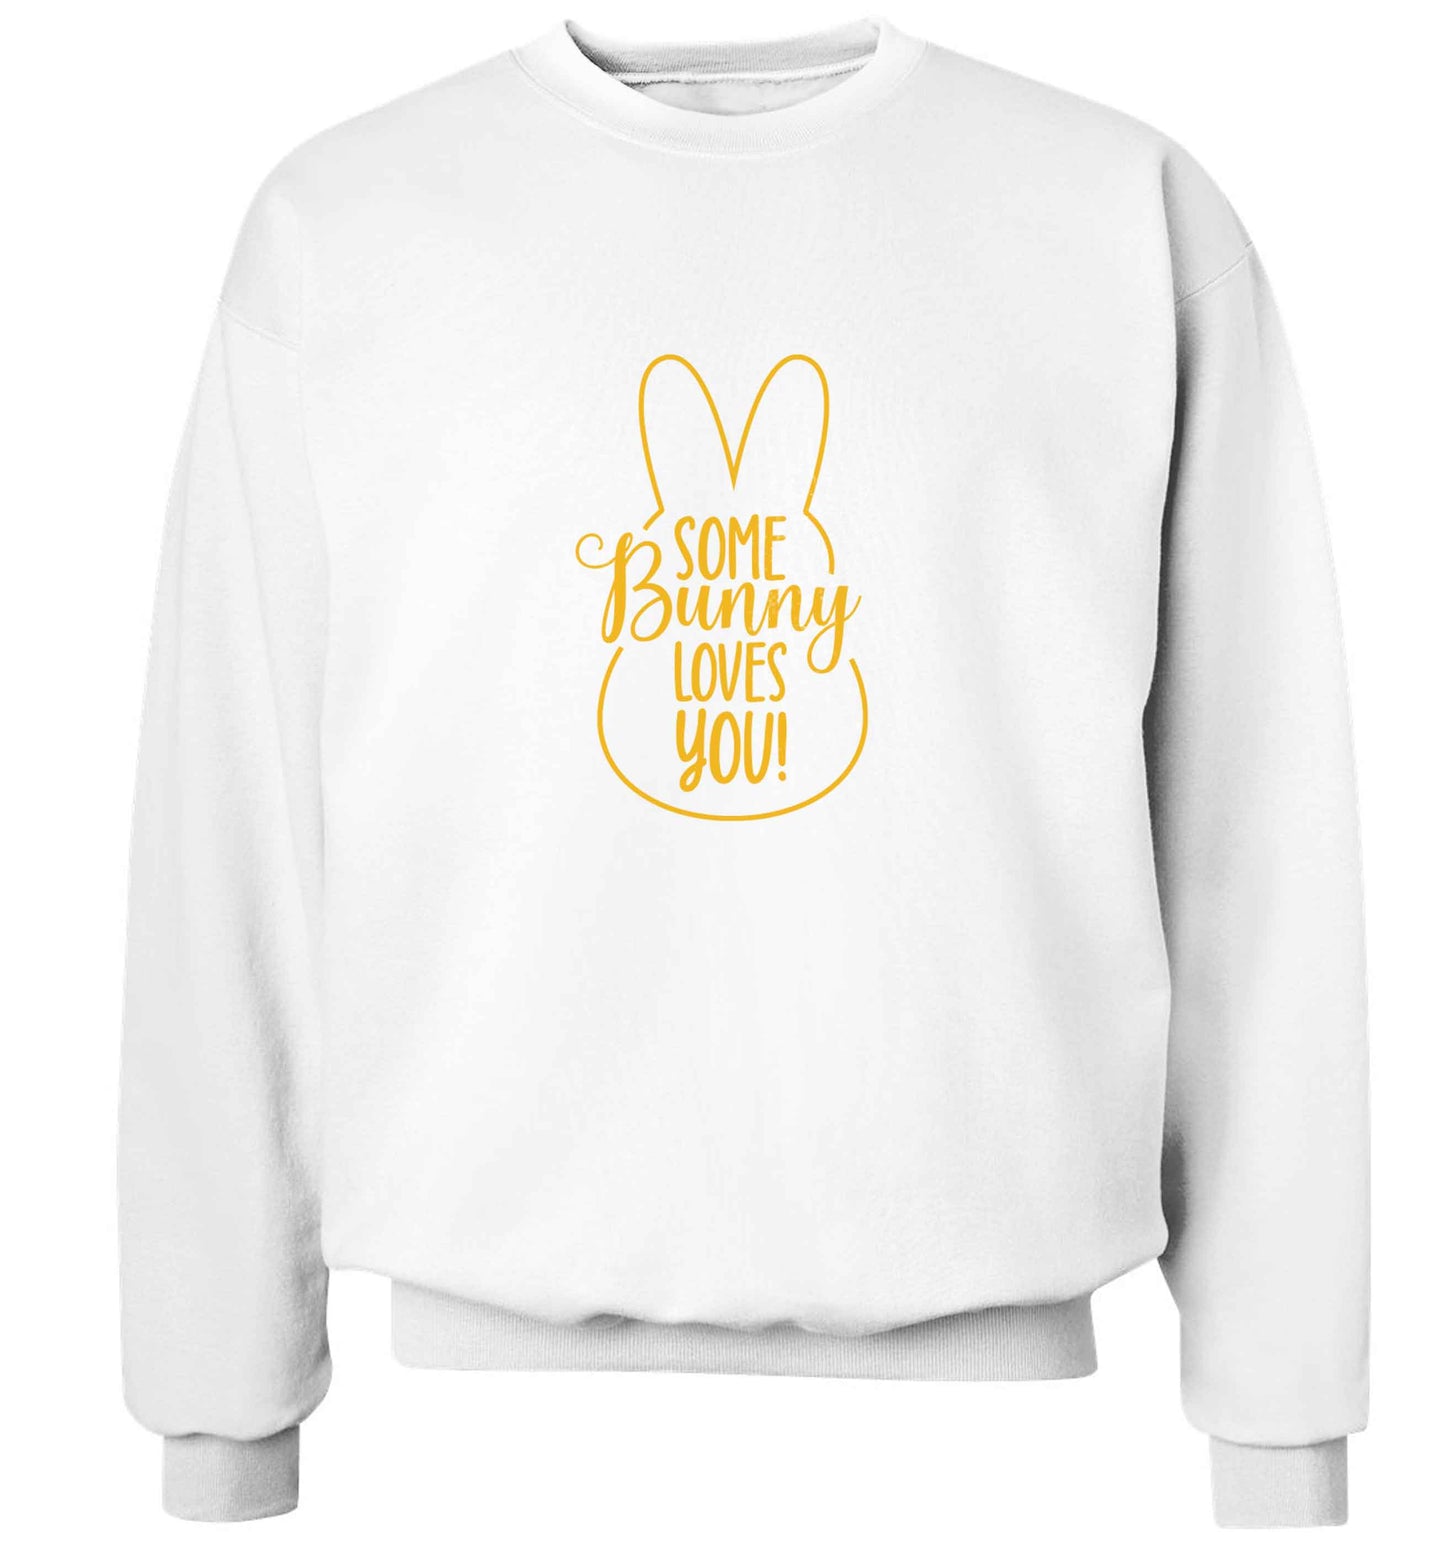 Some bunny loves you adult's unisex white sweater 2XL